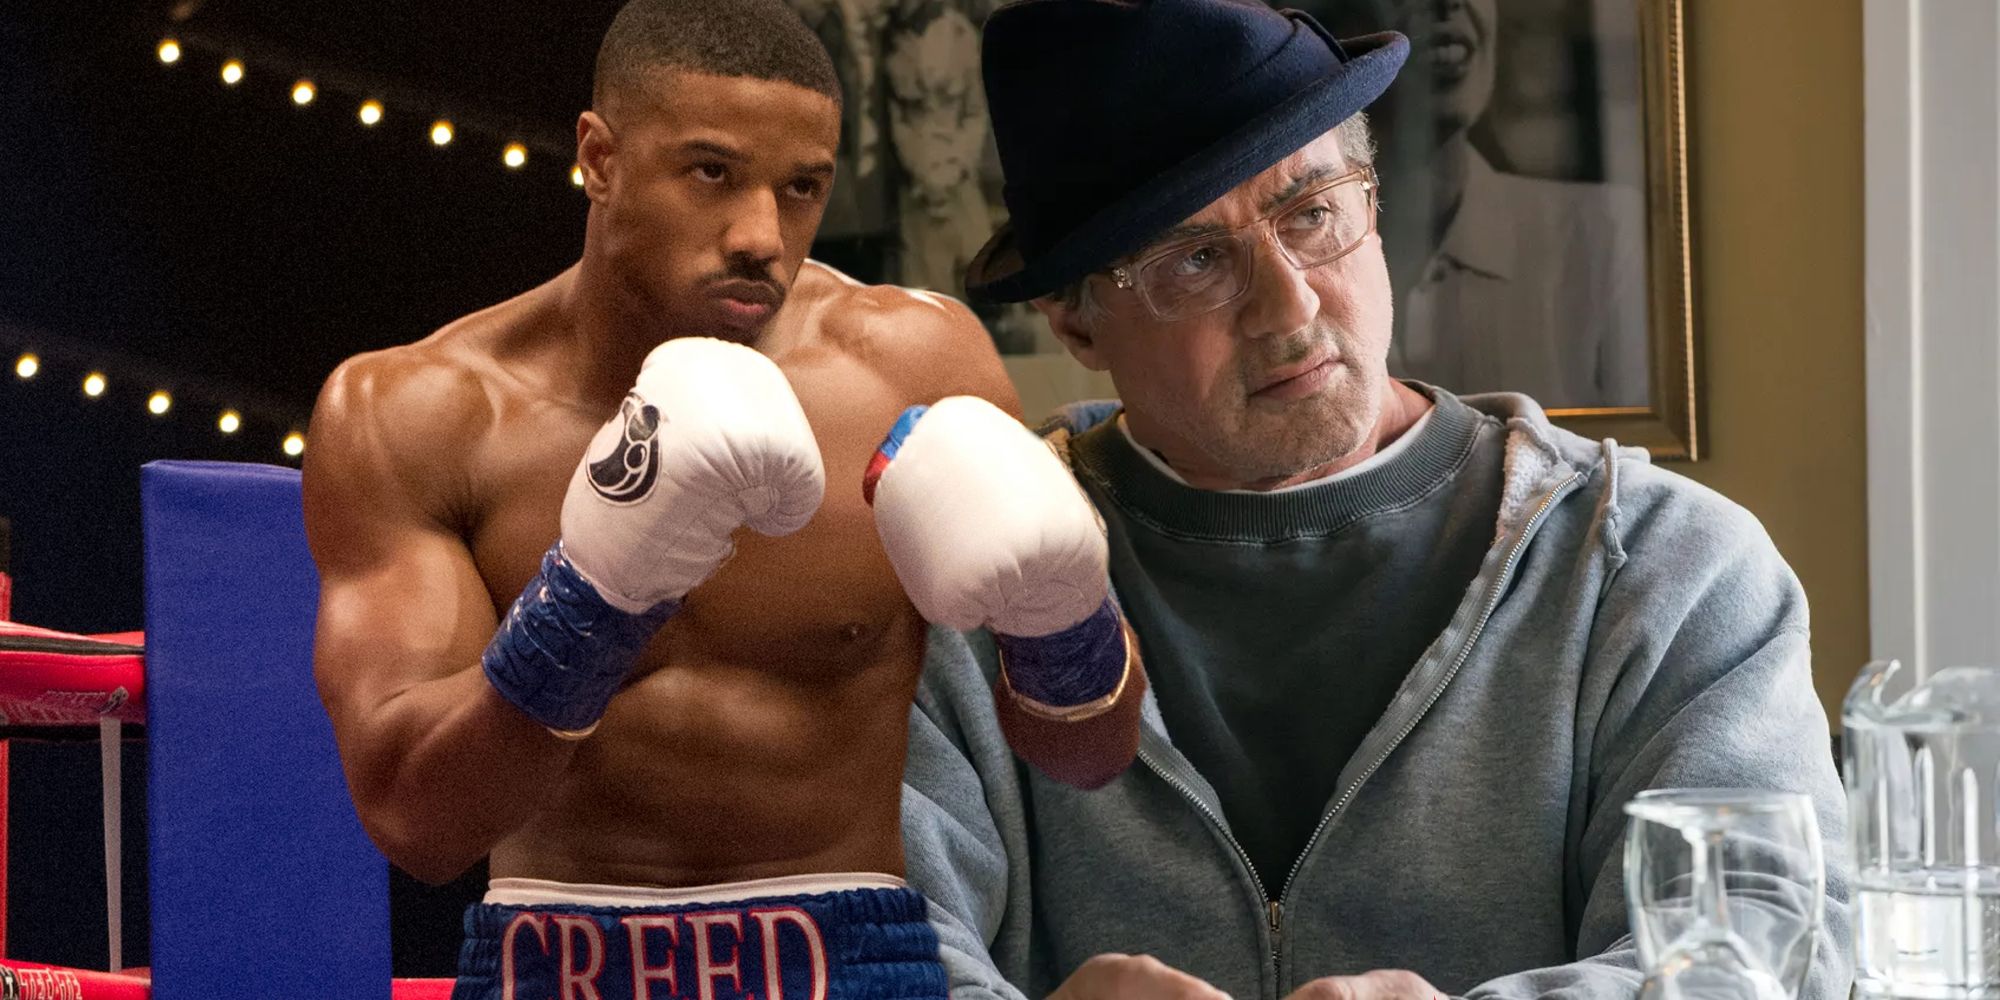 Blended image of Adonis with his boxing gloves on a pit and a serious looking Rocky in the Creed movies